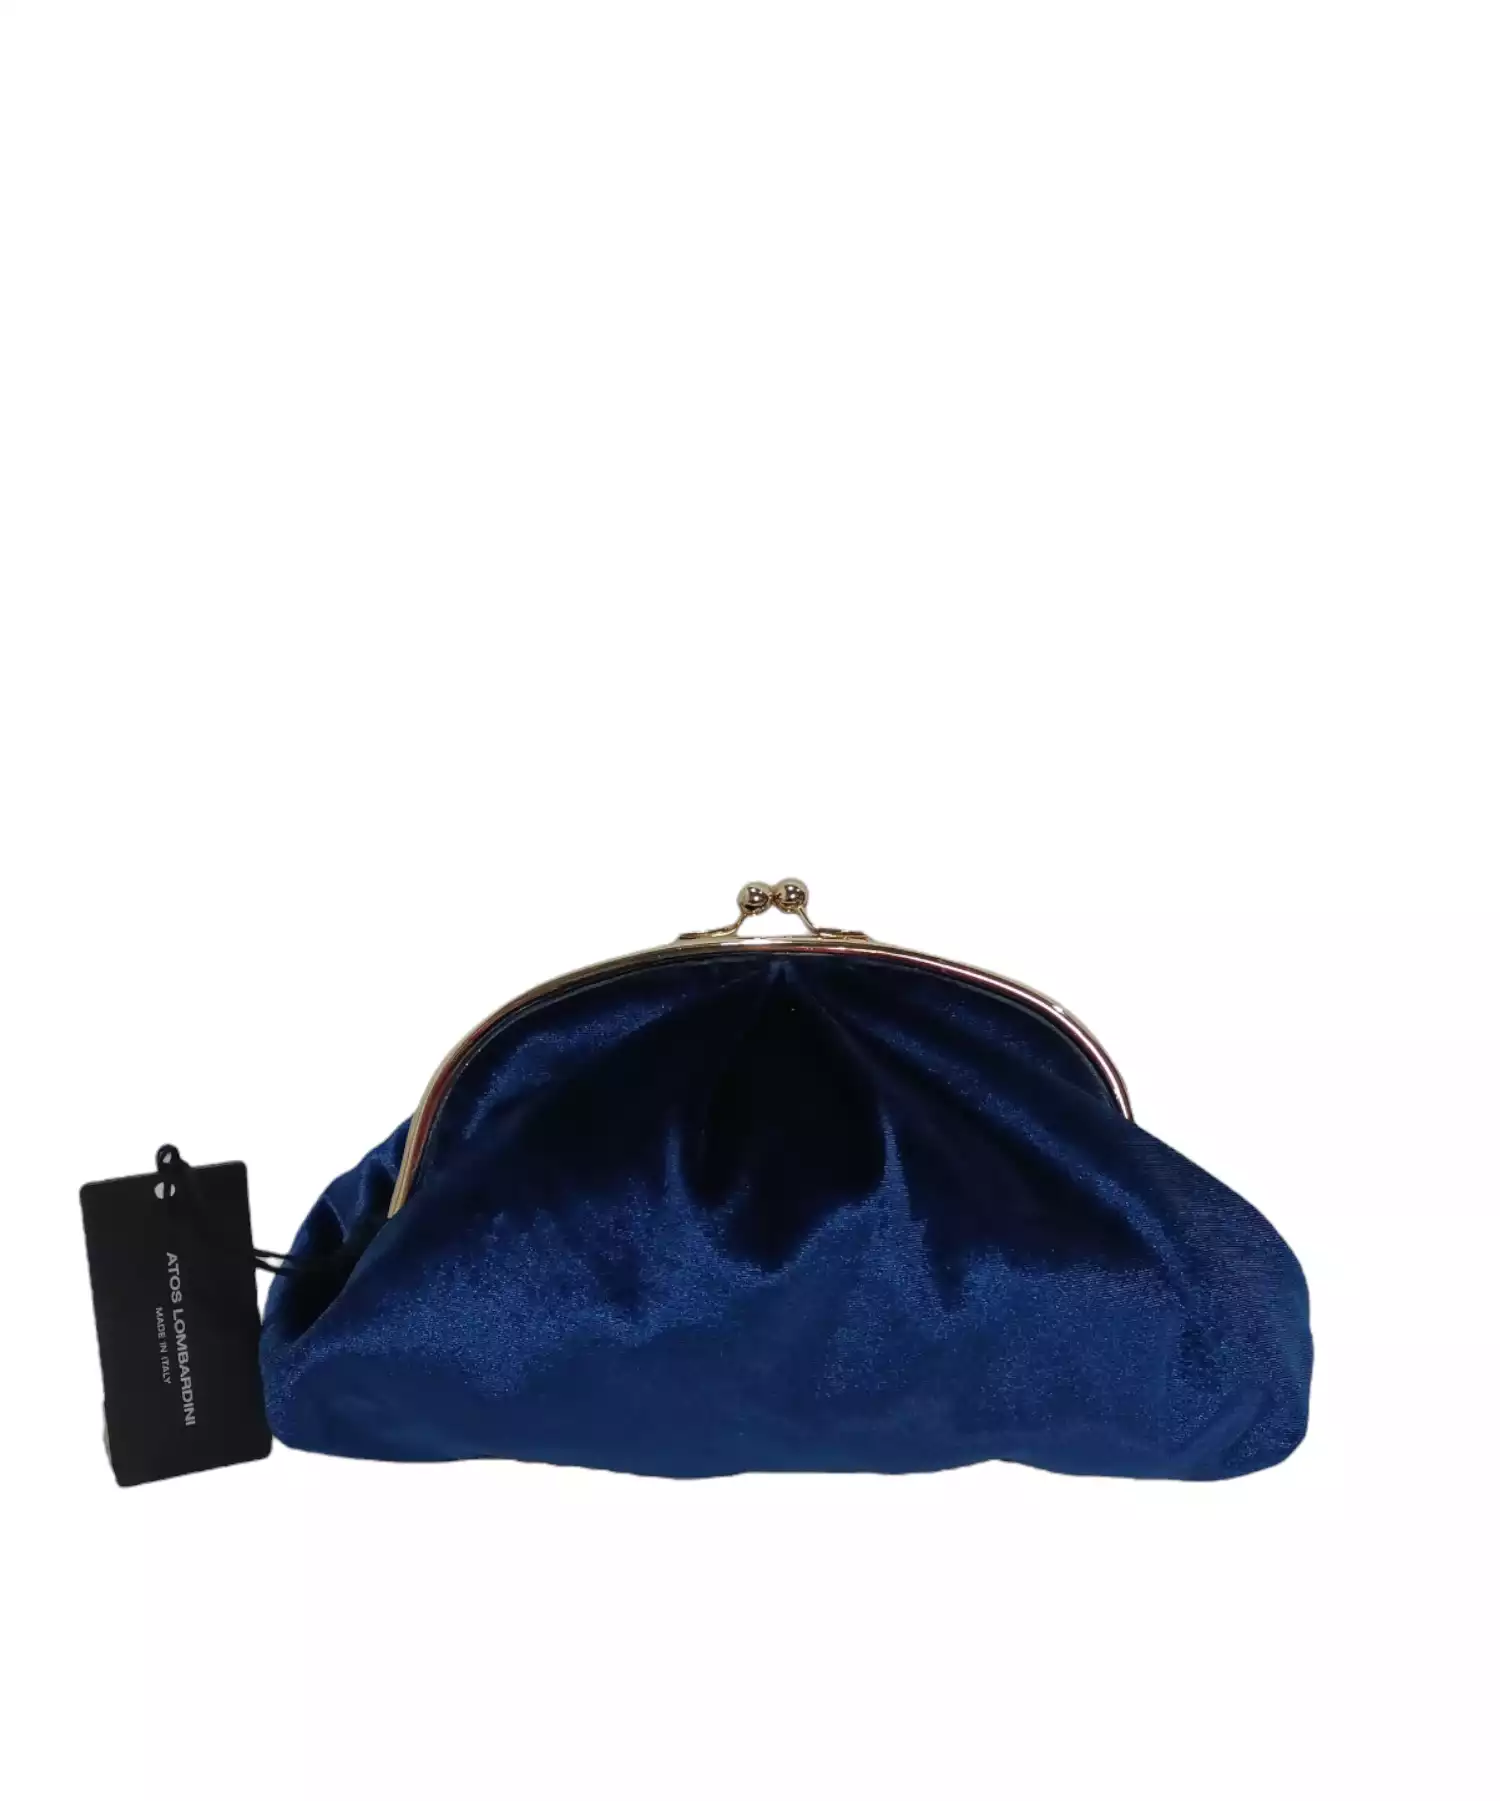 Clutch Bag by Atos Lombardini